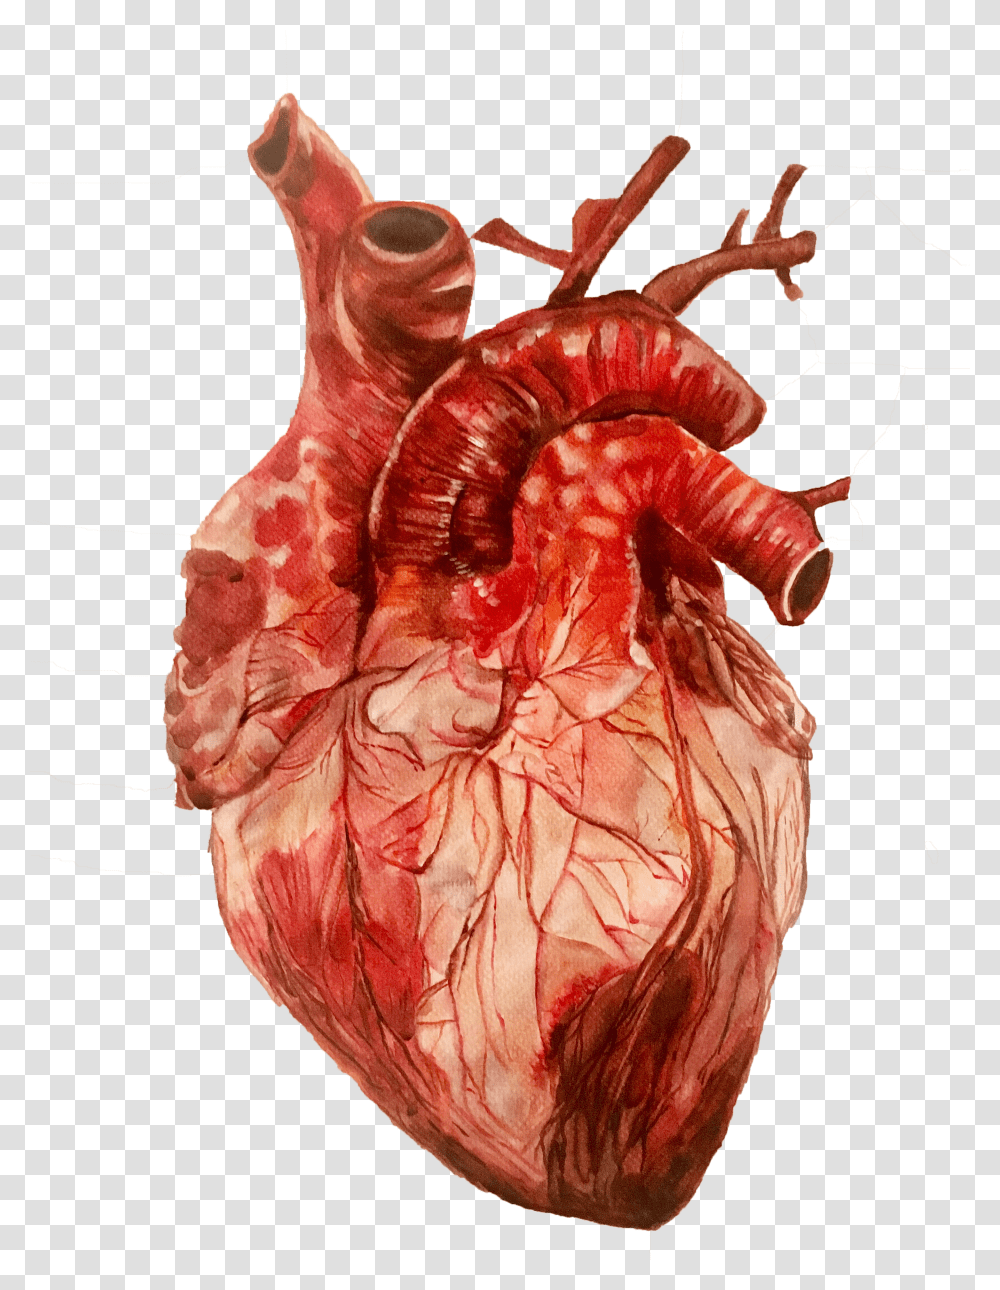 Of Anatomical Heart Study Human Heart Images Hd Transparent Png